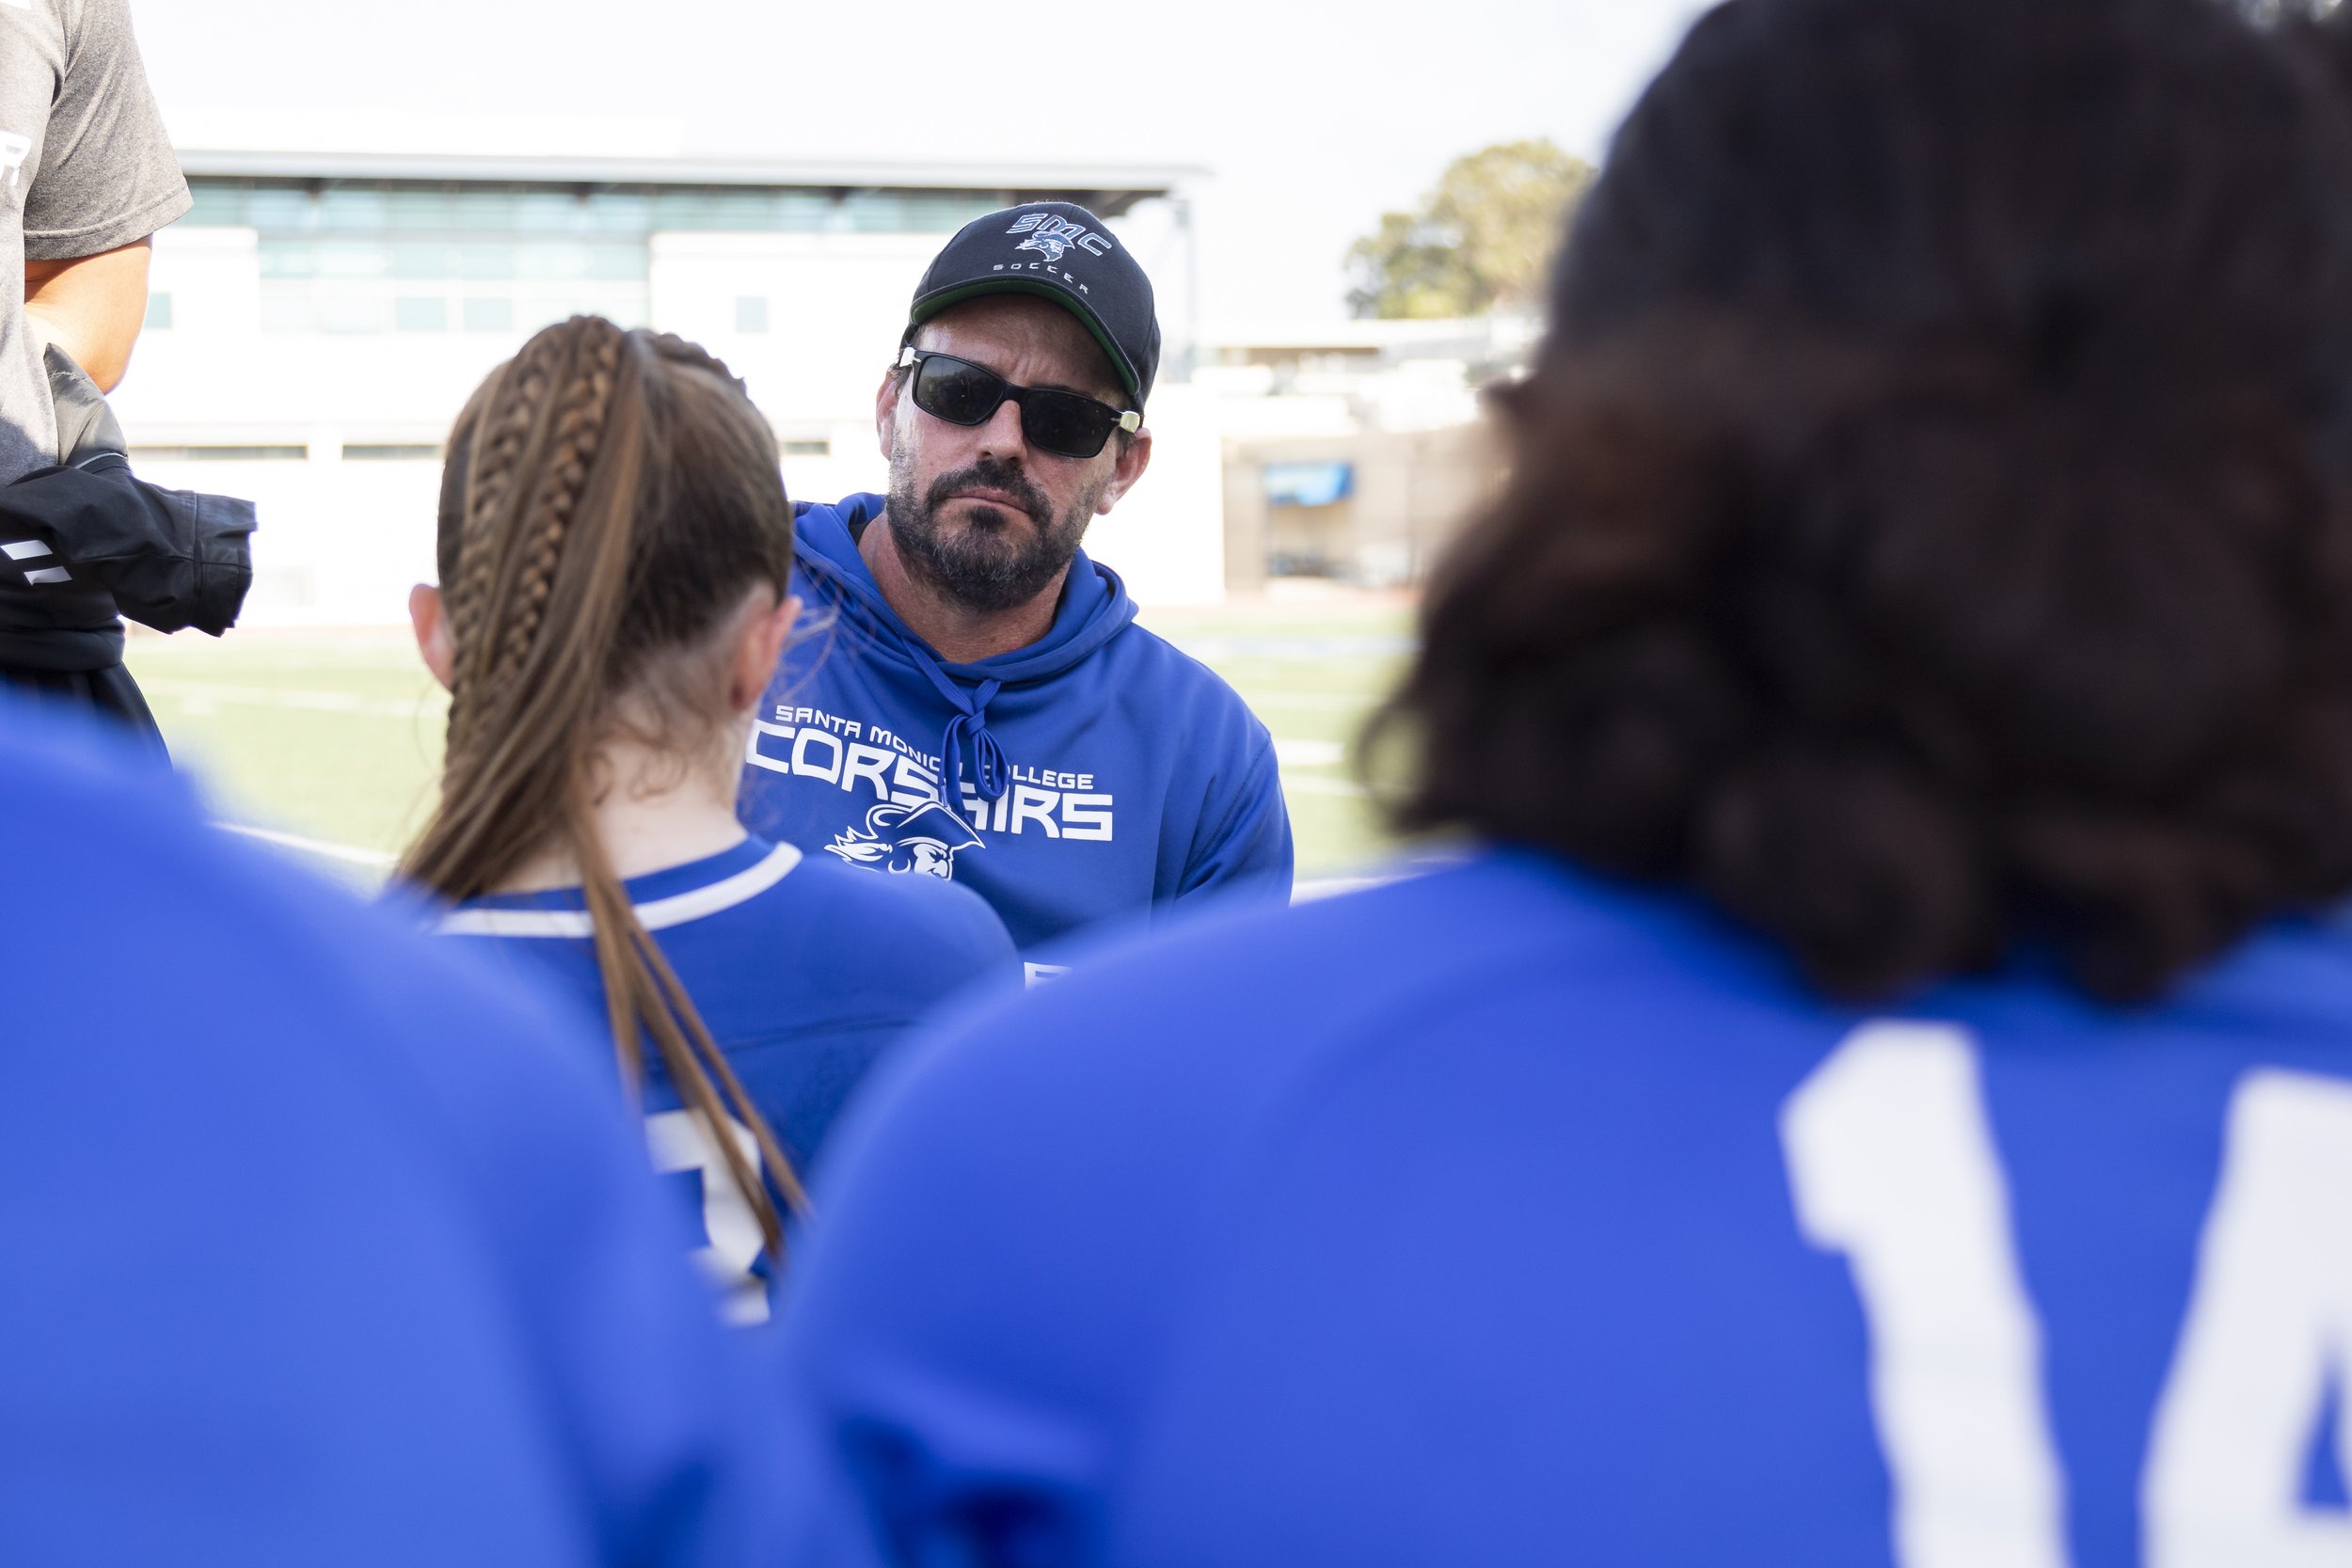  Santa Monica College Corsairs men's soccer head coach Tim Pierce discusses issues the team is having and strategies to overcome them during halftime of a home game against Bakersfield College Renegades in Santa Monica, Calif., on Friday, Oct. 27, 20